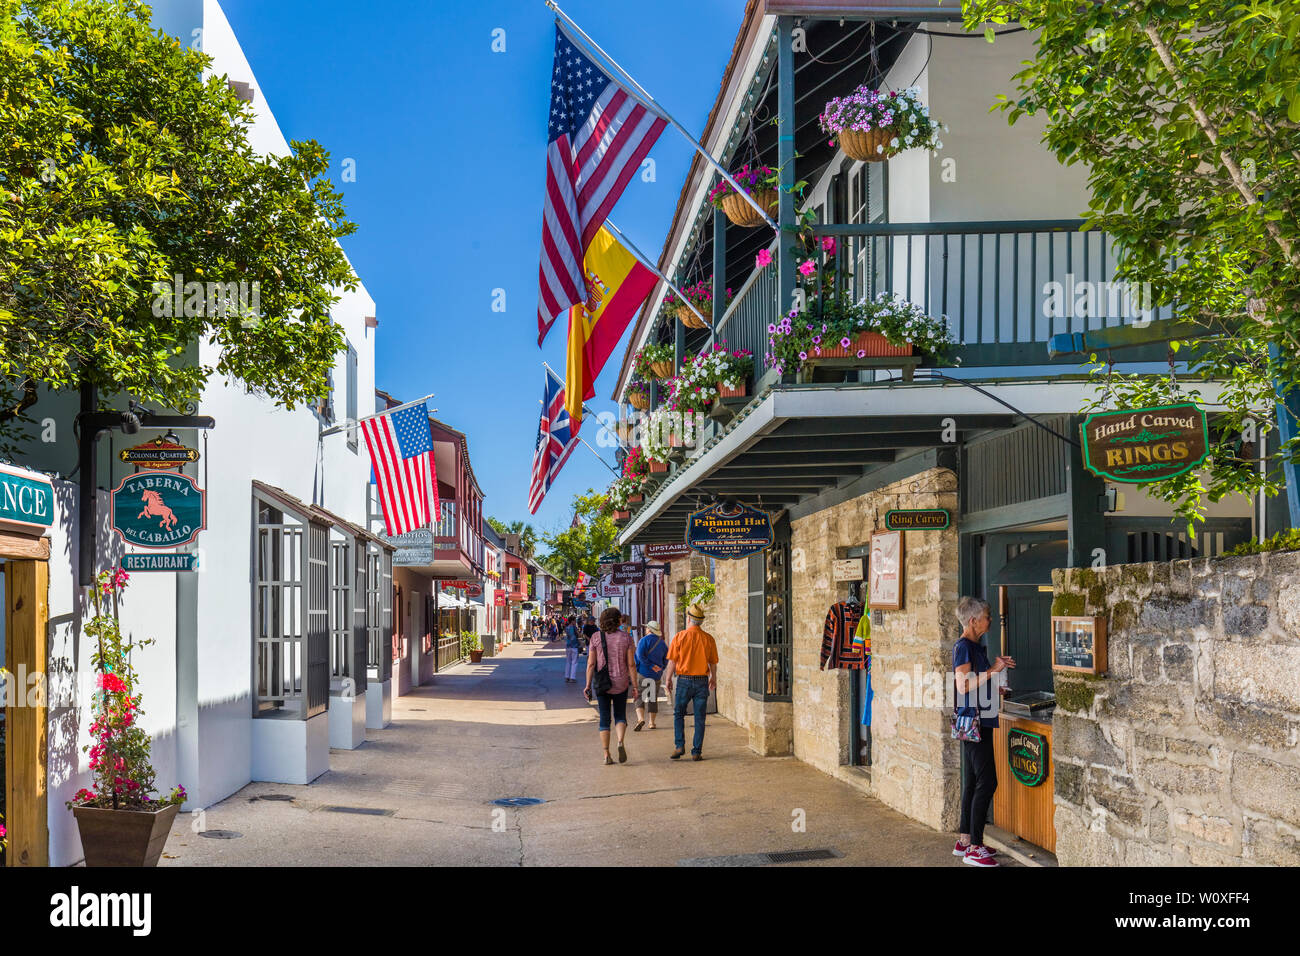 tourists on historic st george street in downtown st augustine florida americas oldest city W0XFF4